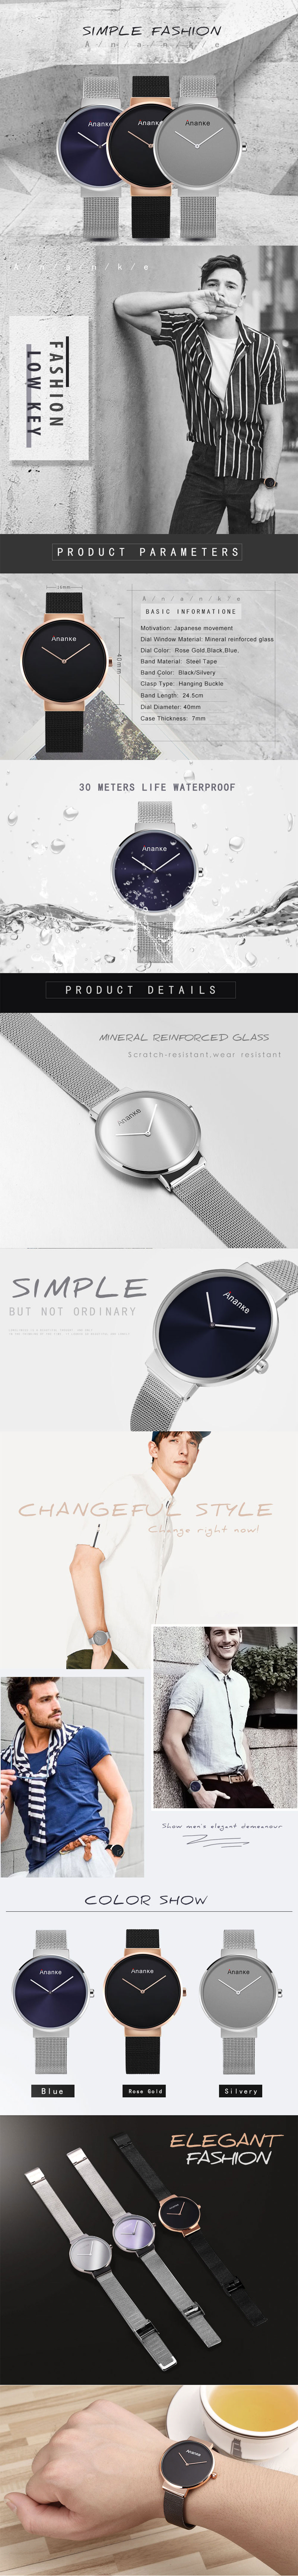 Ananke-Casual-Style-Men-Quartz-Watch-Stainless-Steel-Strap-Fashion-Simple-Dial-Clock-Watch-1270875